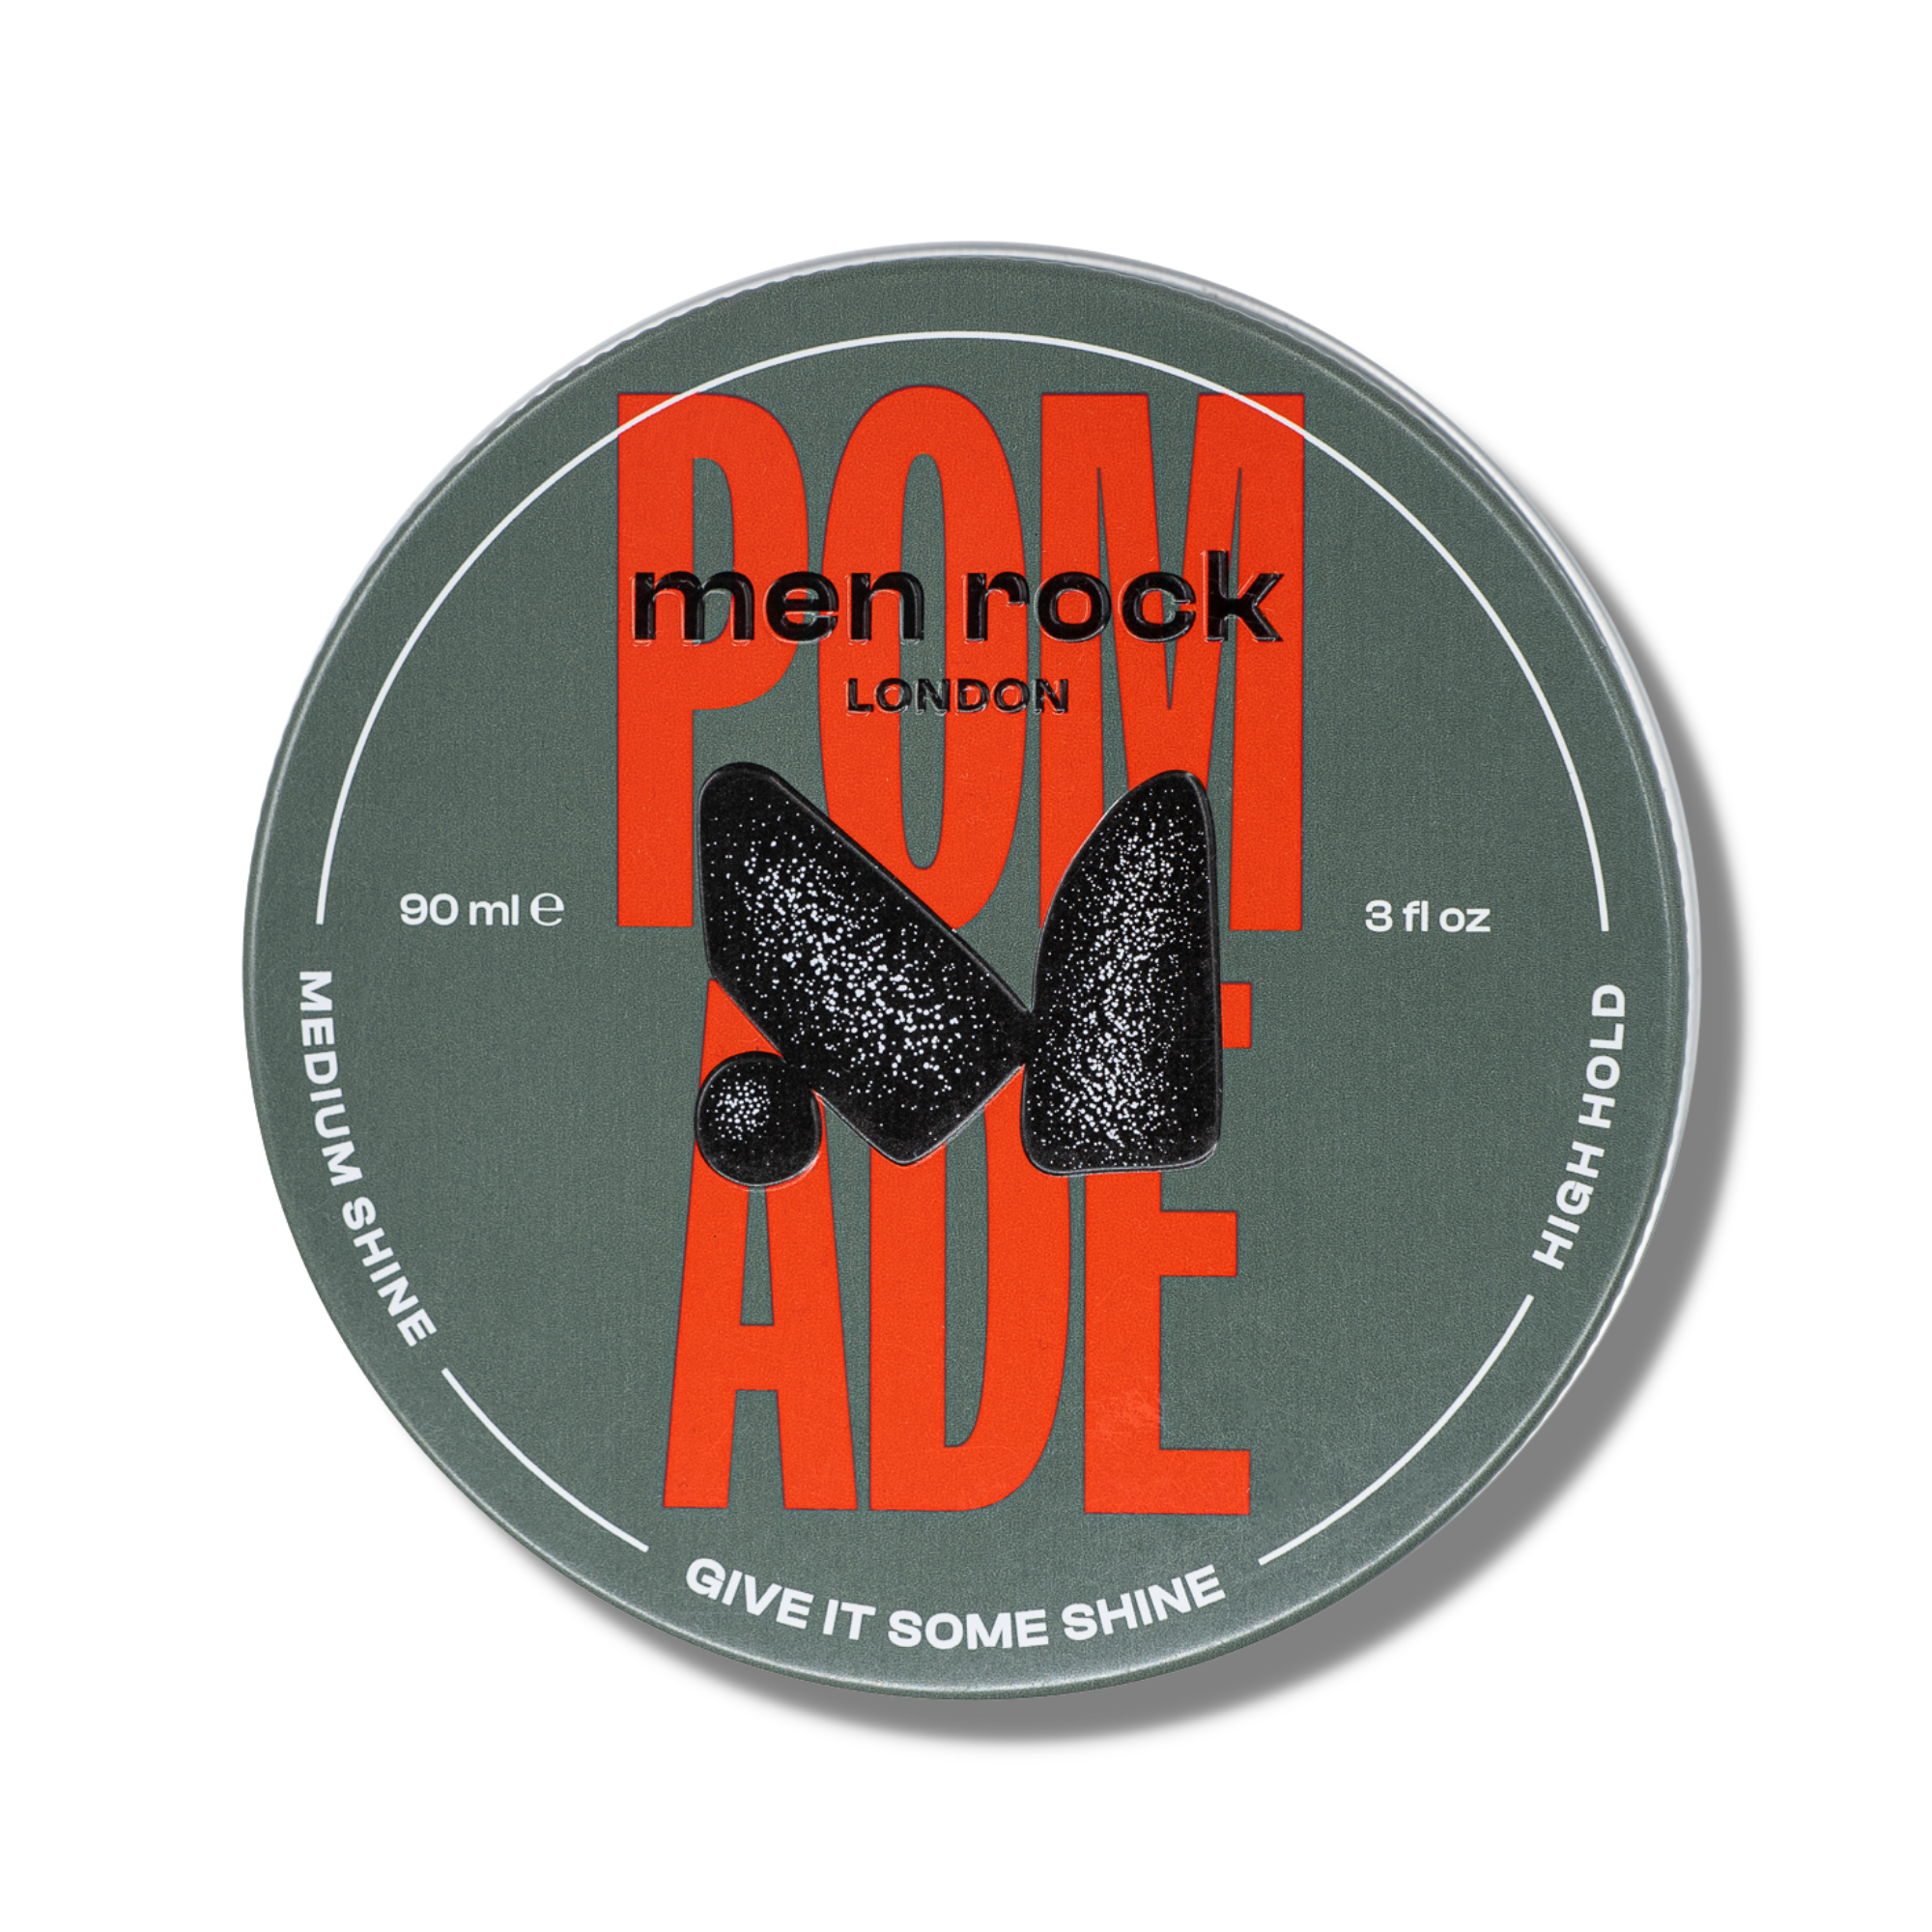 Hair Styling Pomade for men from Men Rock offering a high hold and medium shine